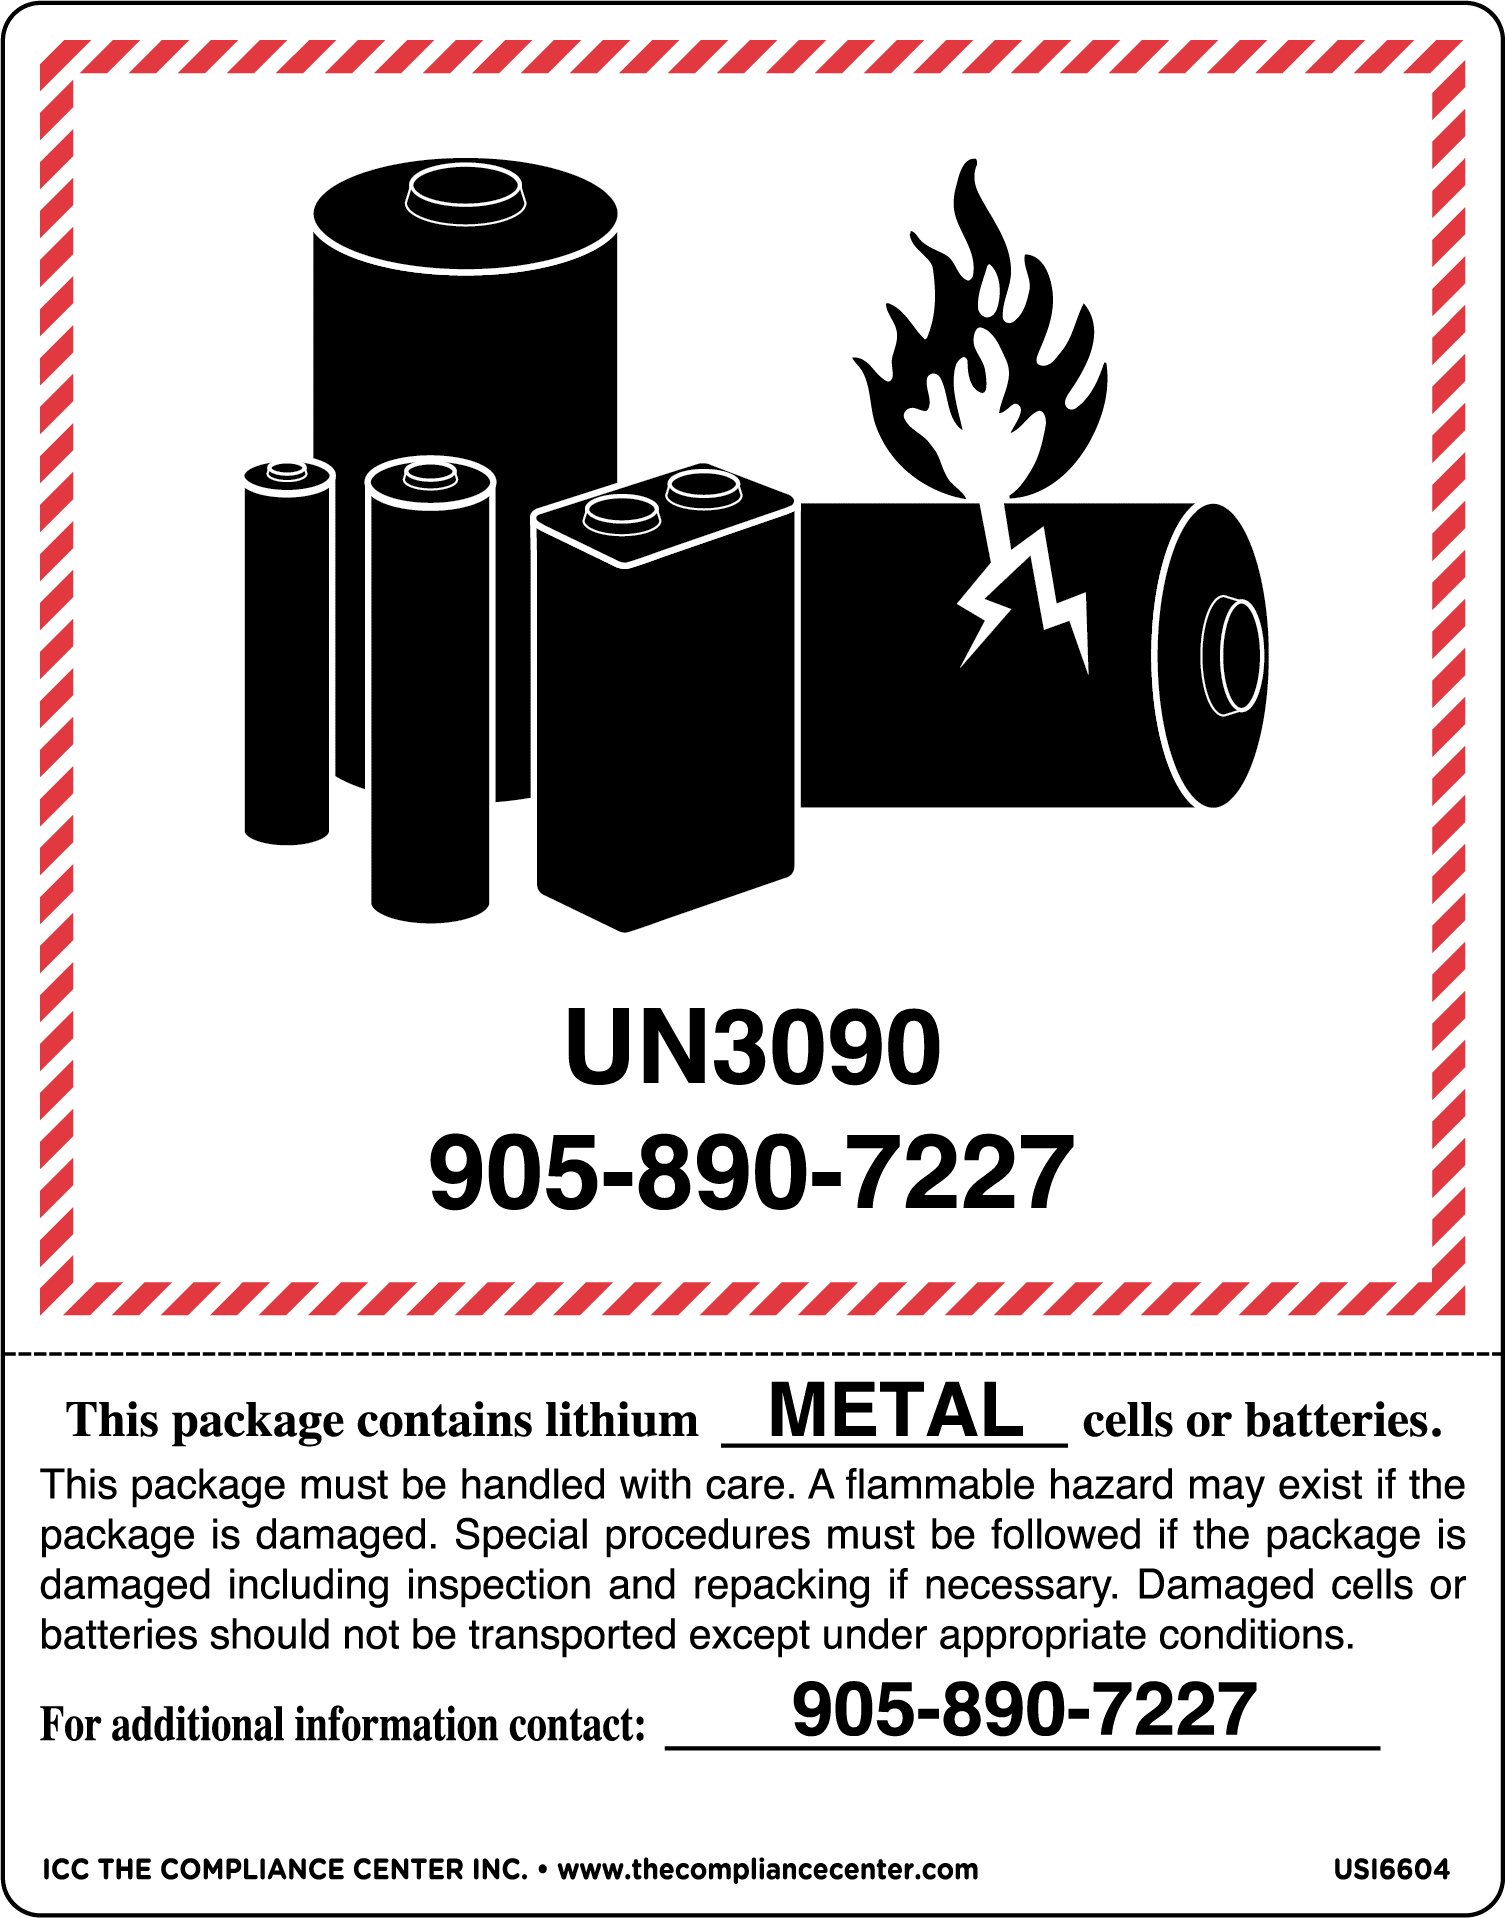 Lithium Battery Pictogram with Hazard Statement, 6.375" x 5", Gloss Paper, 500/Roll - ICC USA